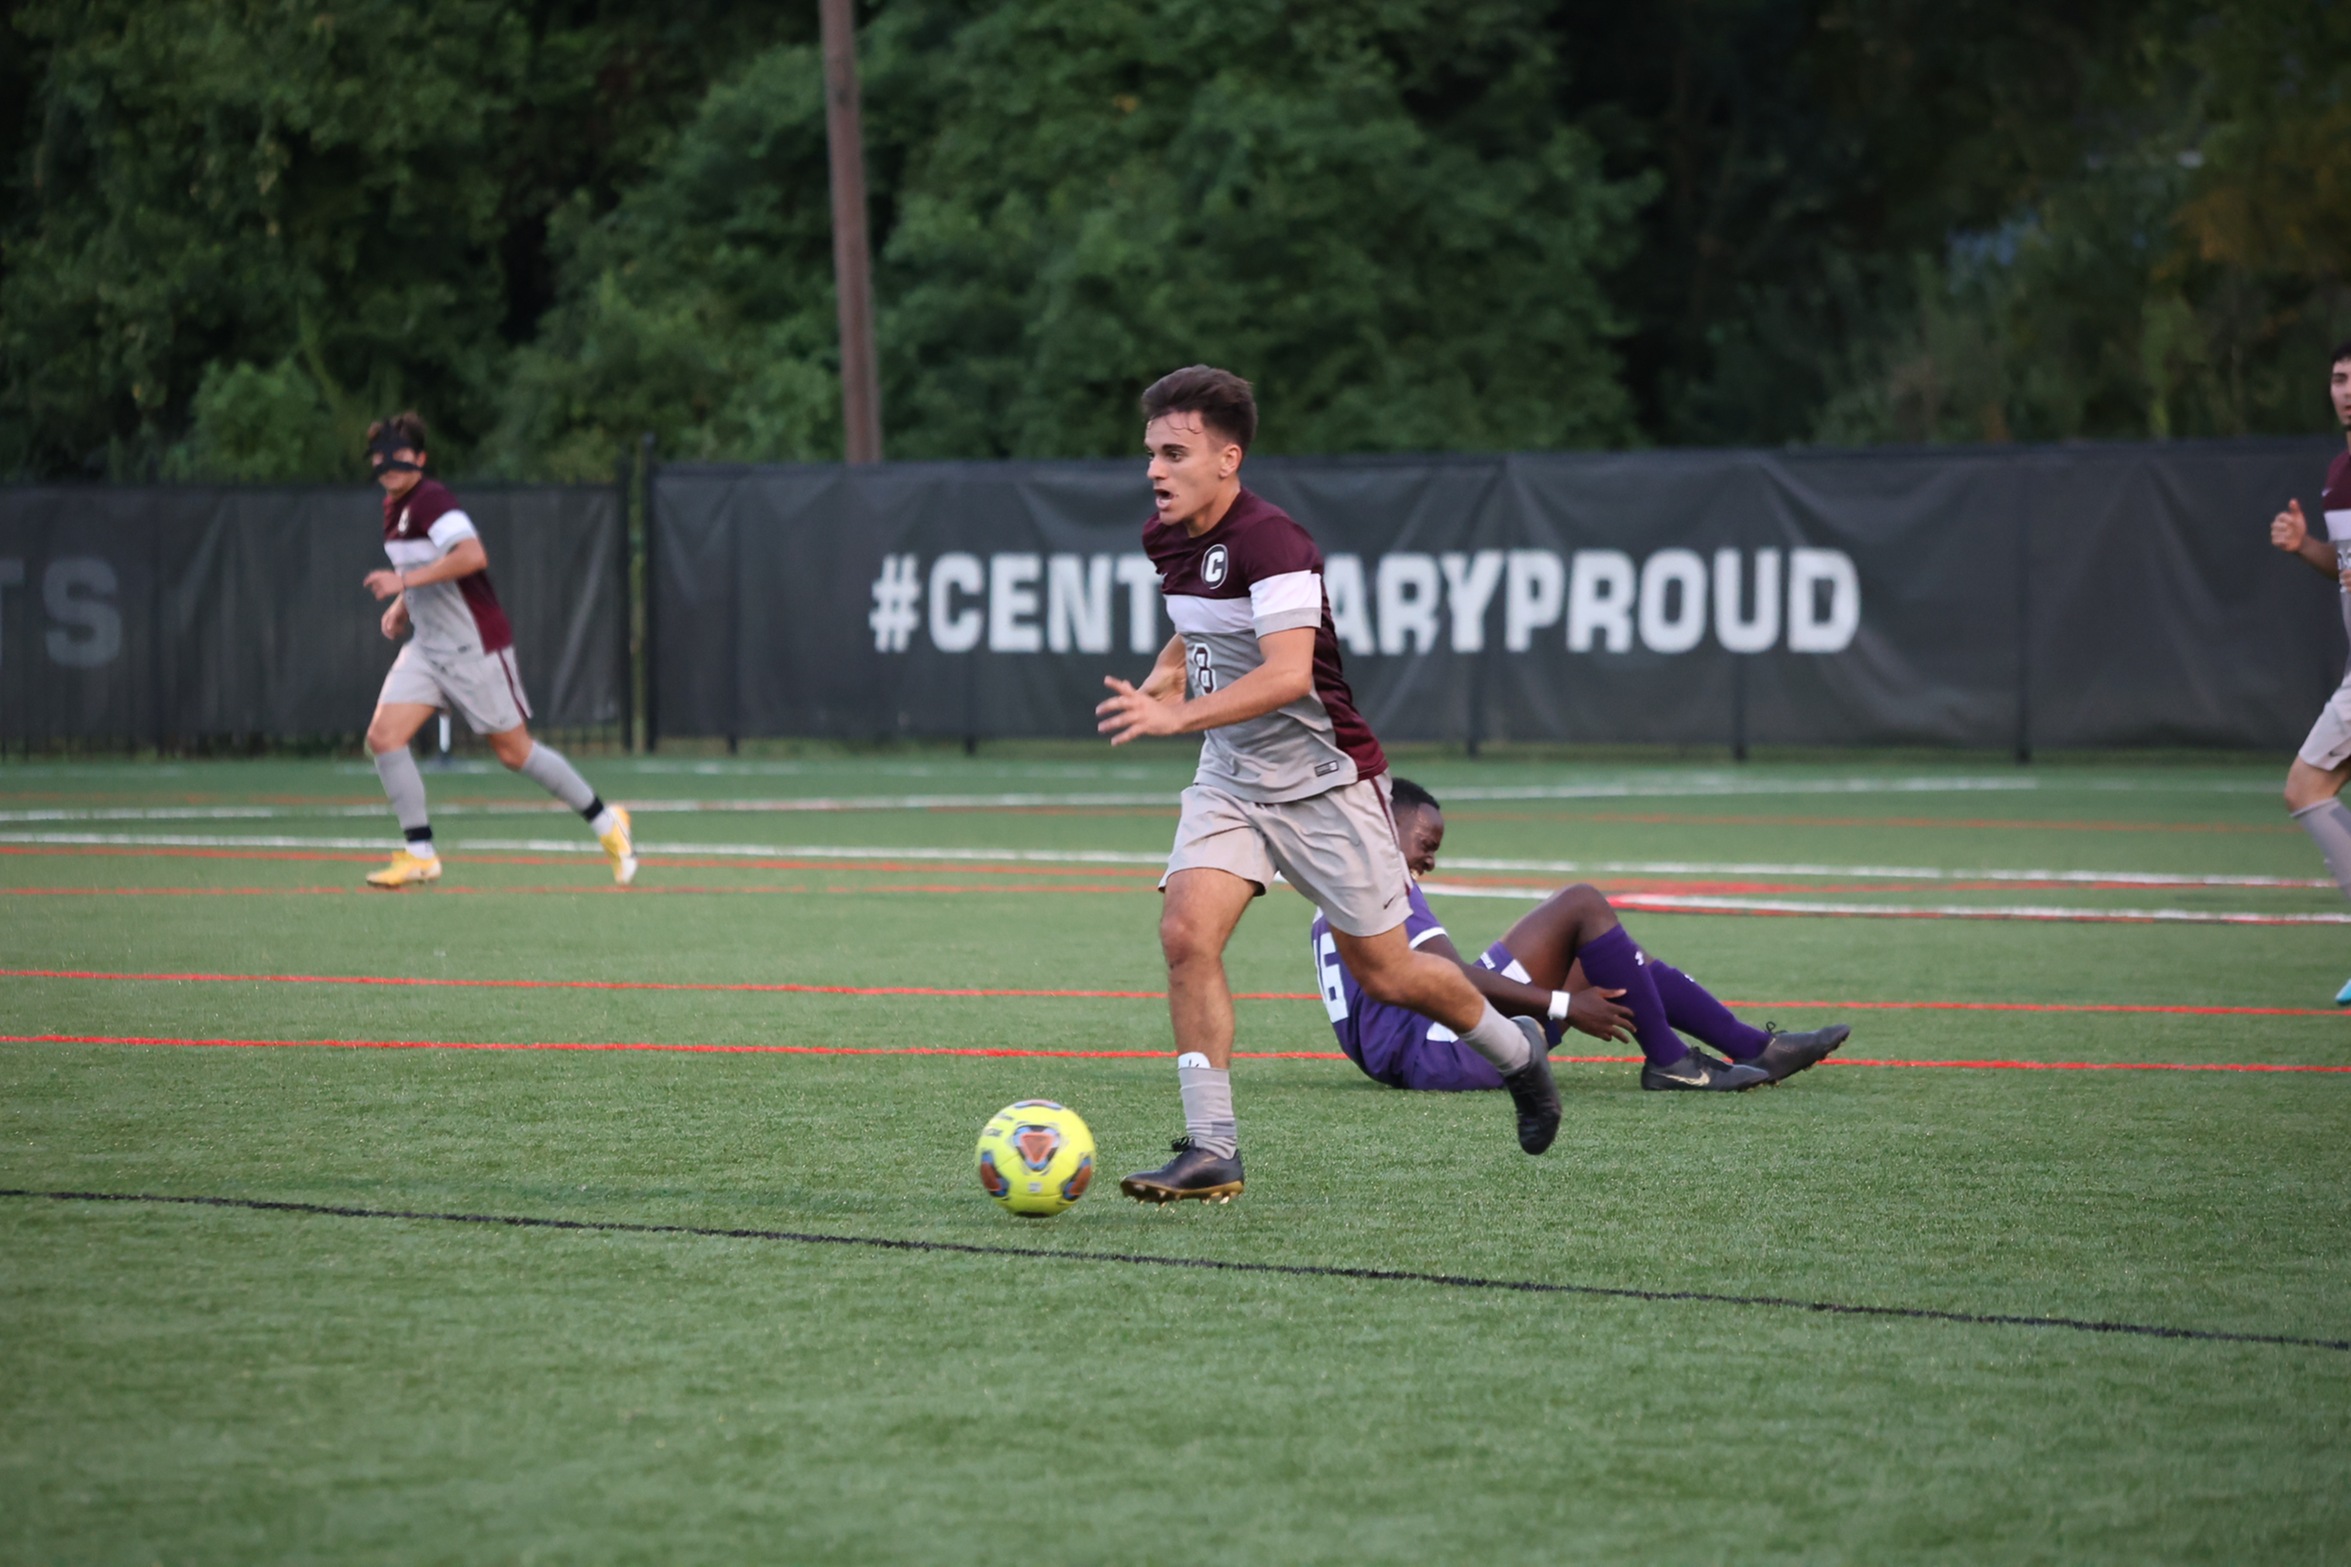 Senior MF Jaron Petreas continued his impressive season with a goal and an assist in Friday's win.